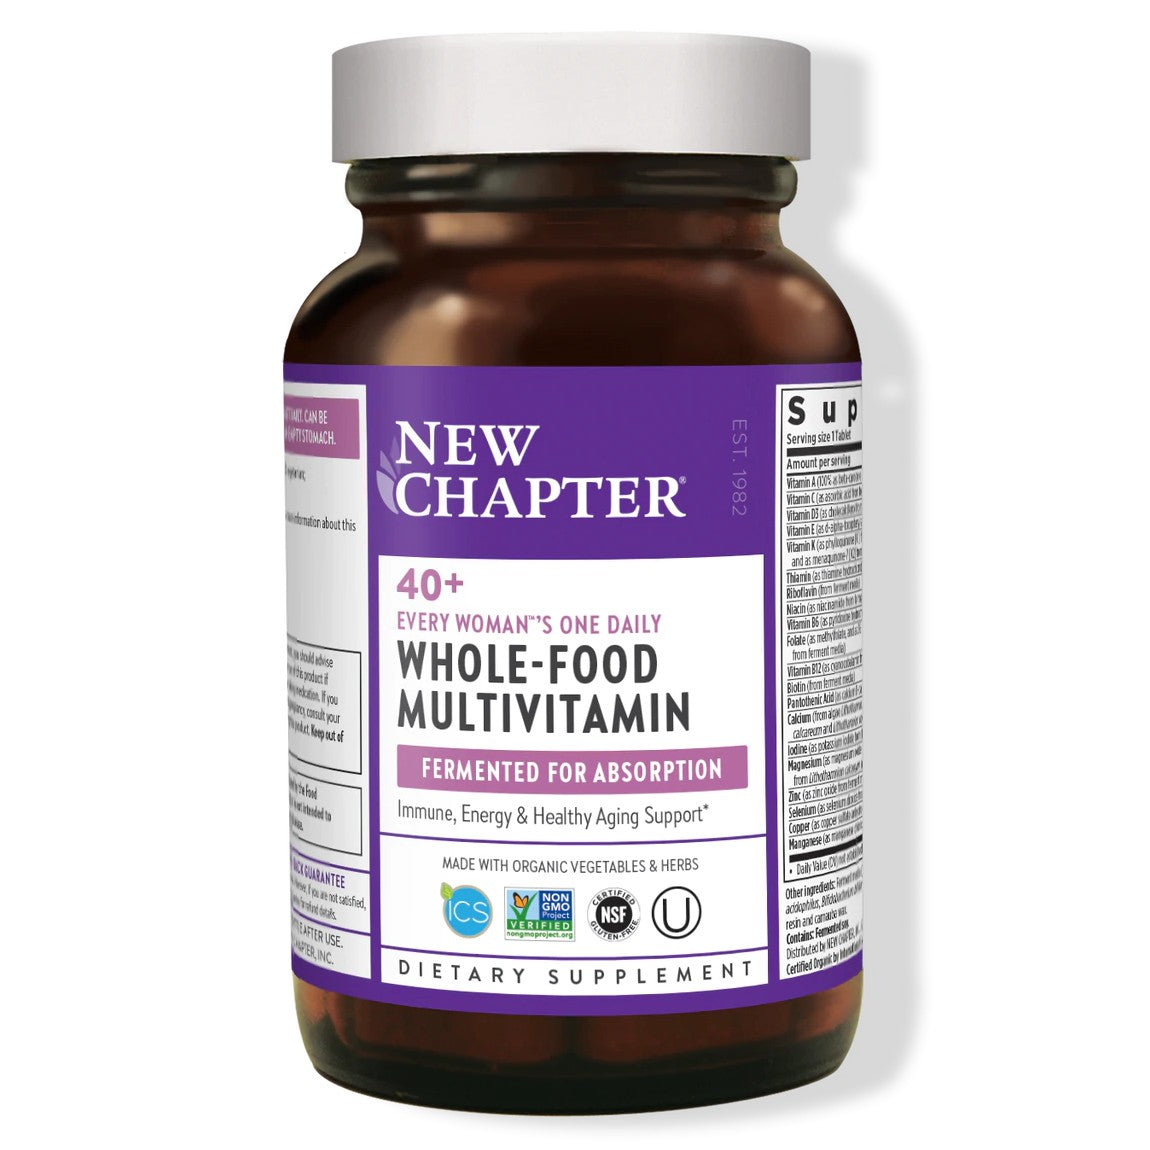 Every Woman's One Daily 40+ Multivitamin - My Village Green